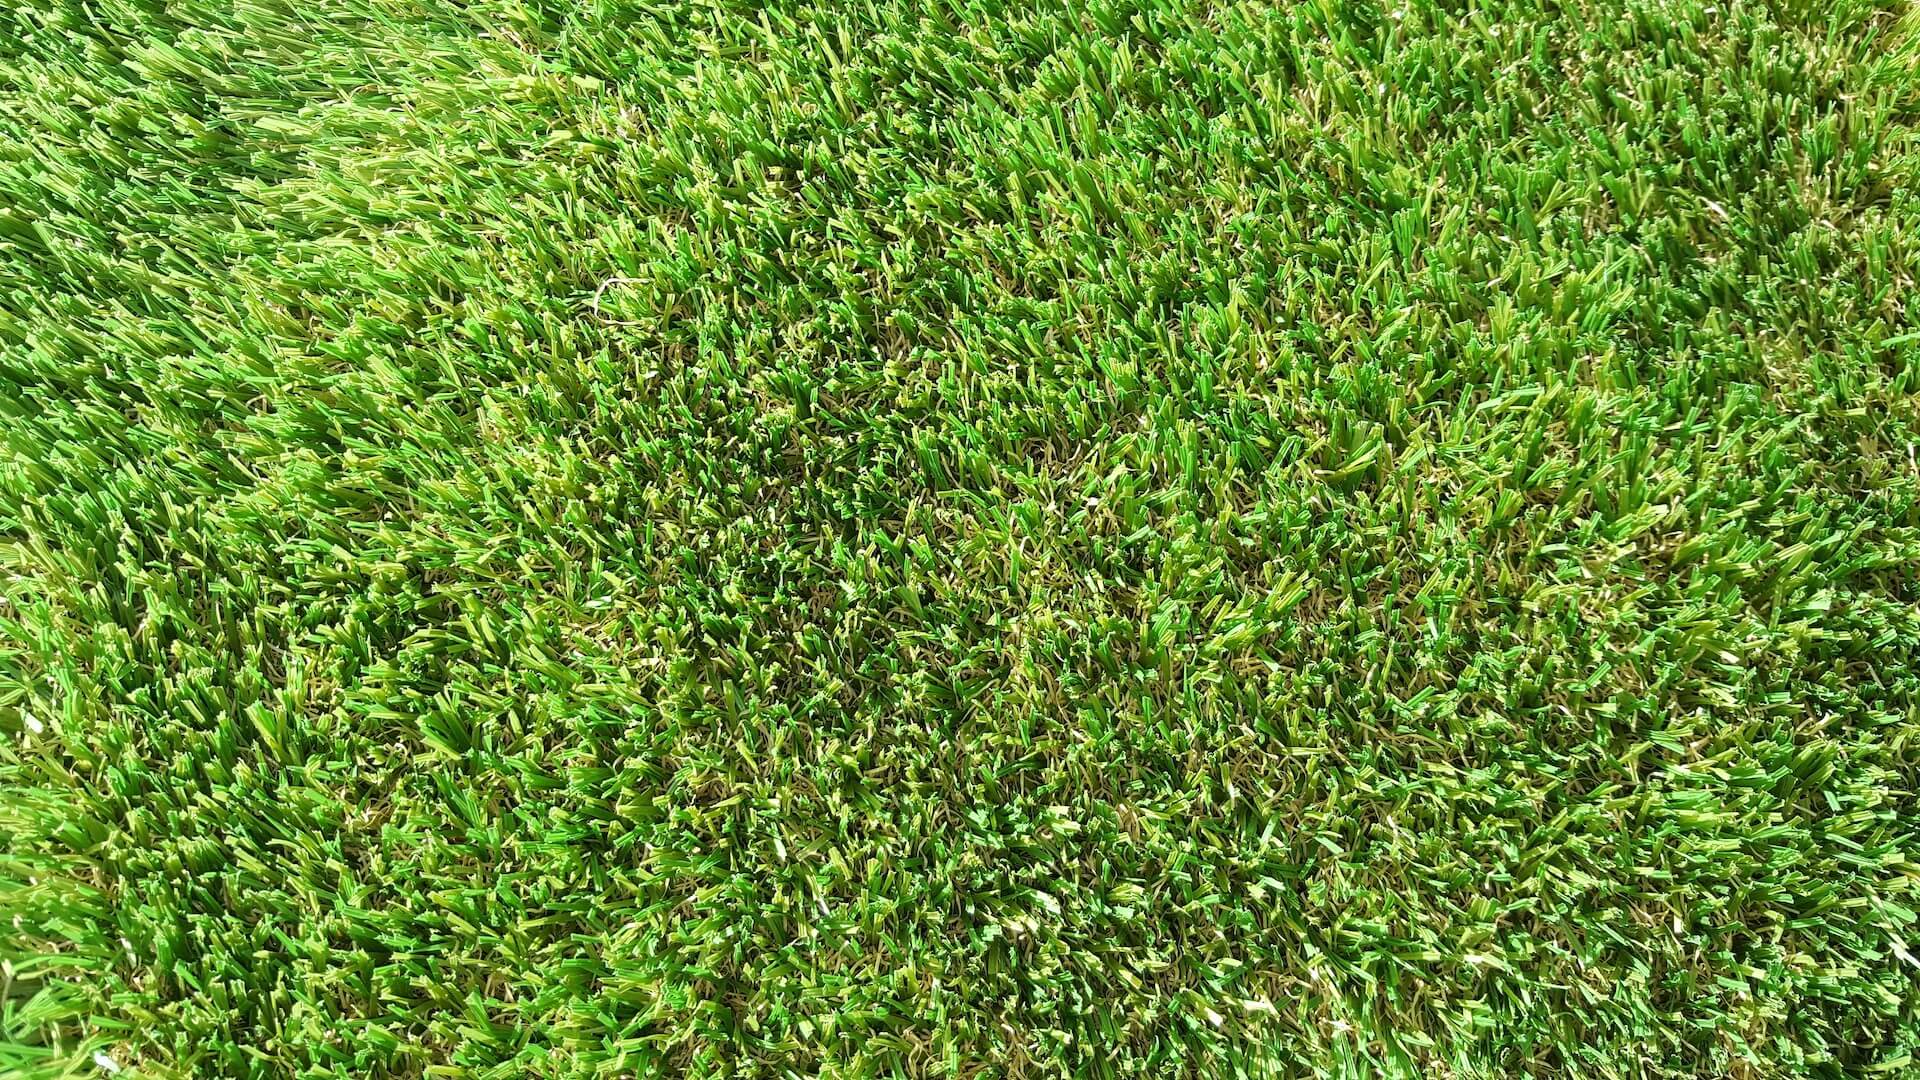 Exquisite Turf Synthetic Turf Kimberley Cool Touch - Online Flooring Store